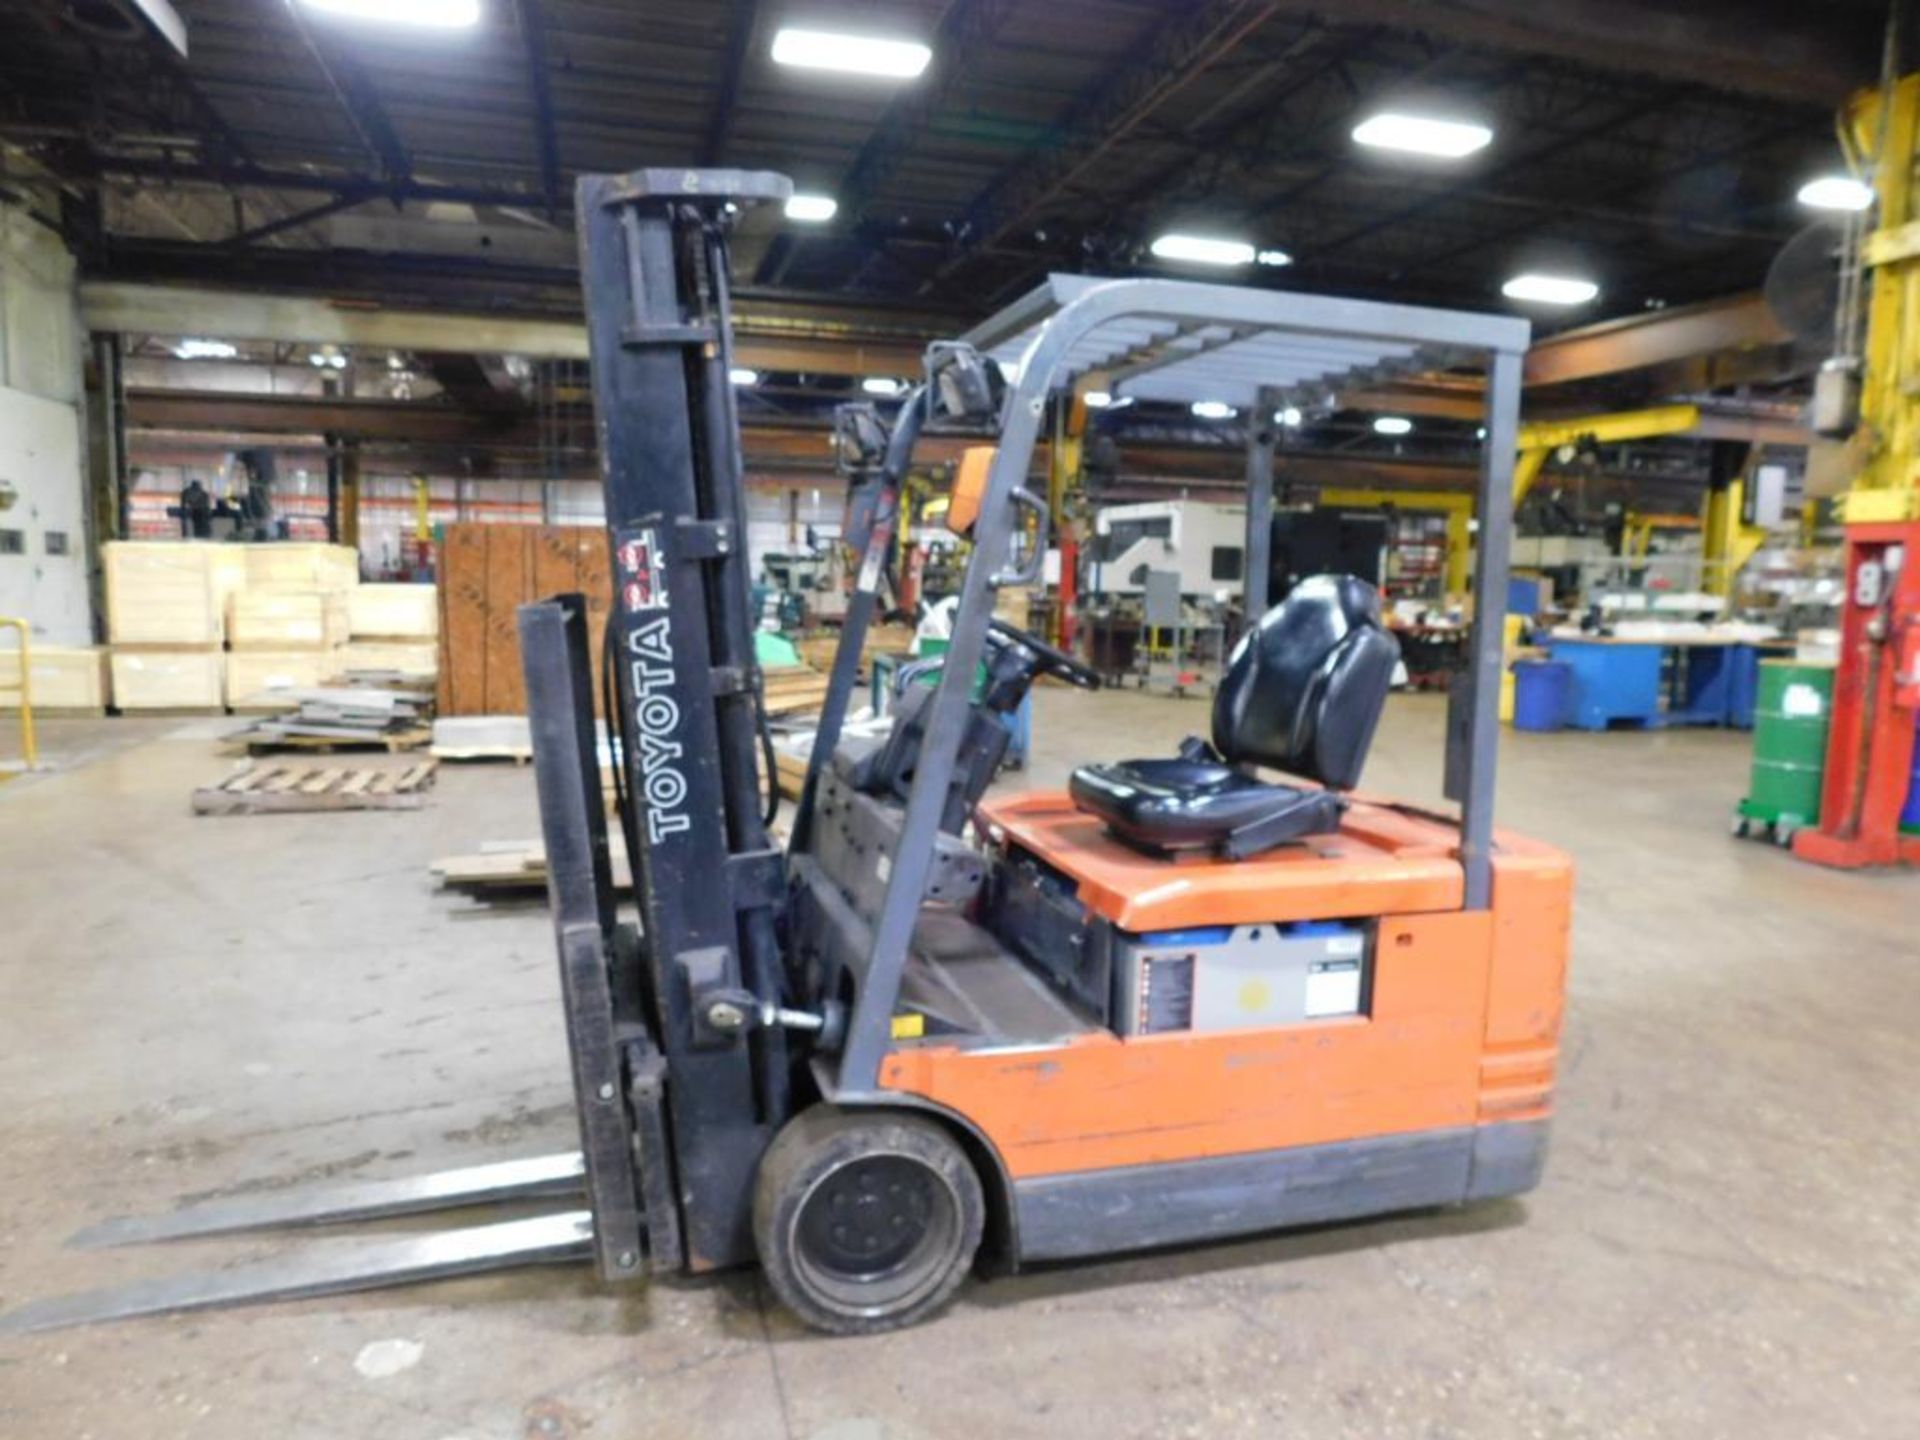 Toyota 3,450 Lb. Electric Forklift Model 5FBE20, S/N 10222, Solid Tires, 189" Max Lift Height, 3-Sta